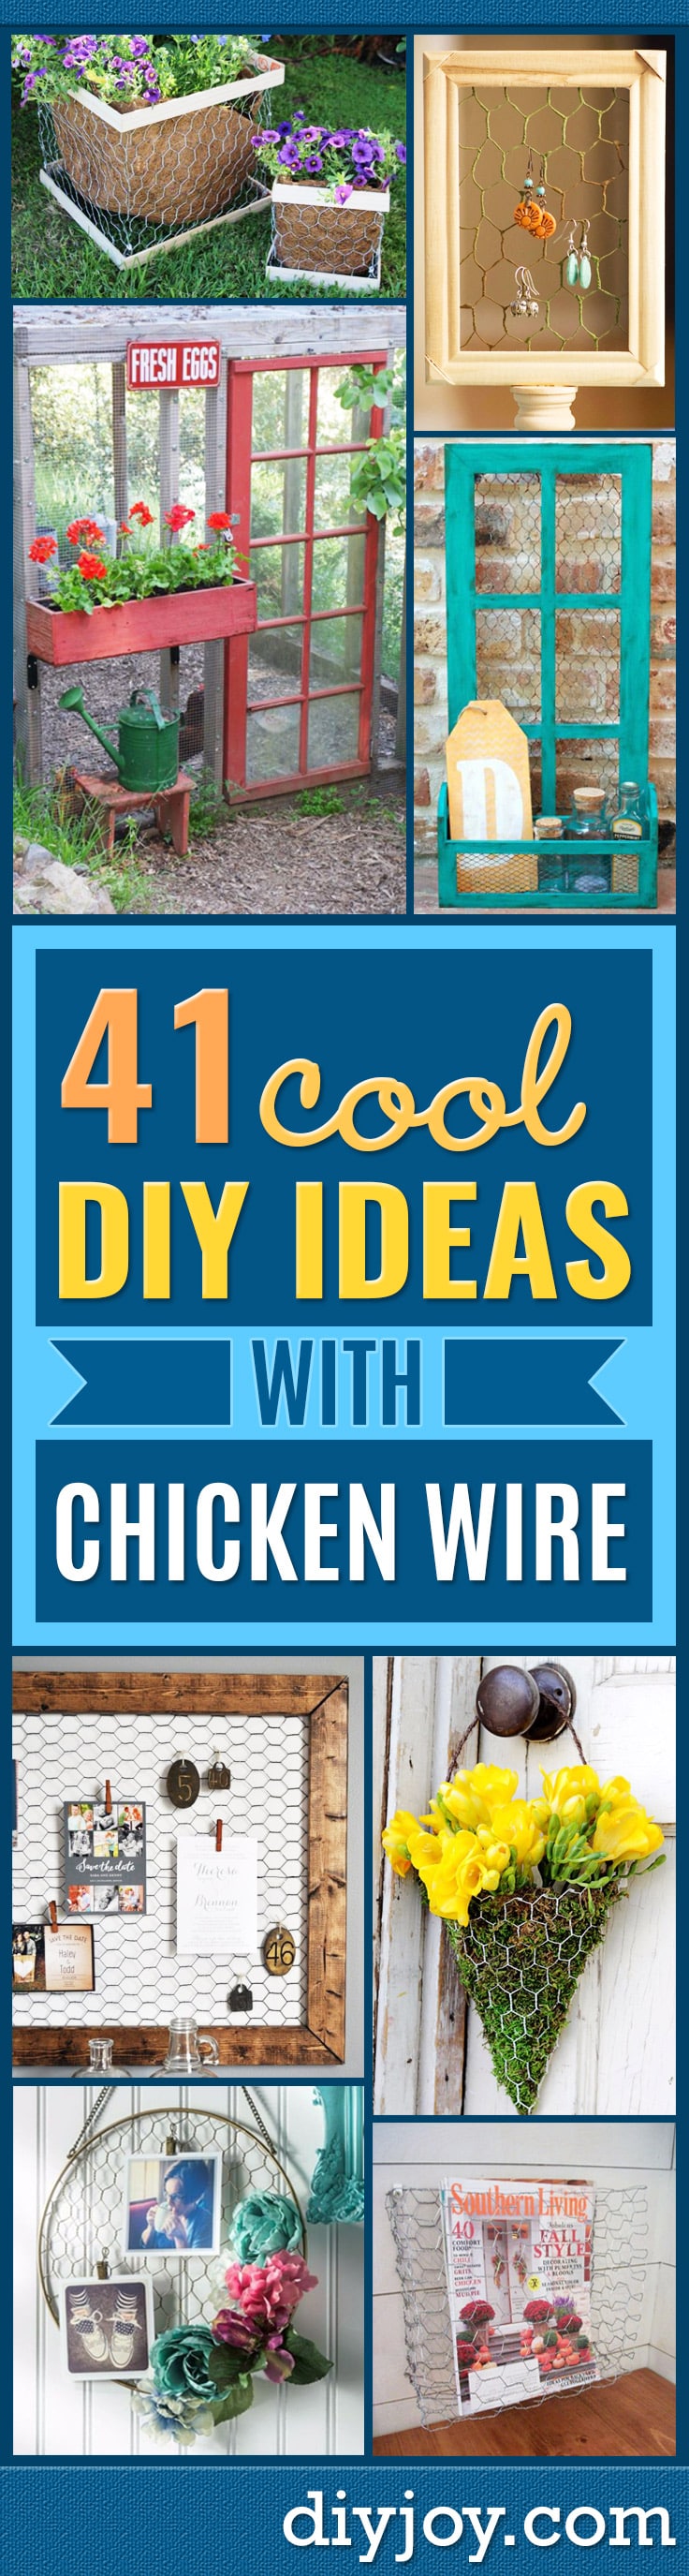 diy chicken wire crafts and home decor ideas - rustic Farmhouse DIY Decor Tutorials With Chickenwire and Easy Vintage Shabby Chic Home Decor for Kitchen, Living Room and Bathroom - Creative Country Crafts, Furniture, Patio Decor and Rustic Wall Art - crafts to sell